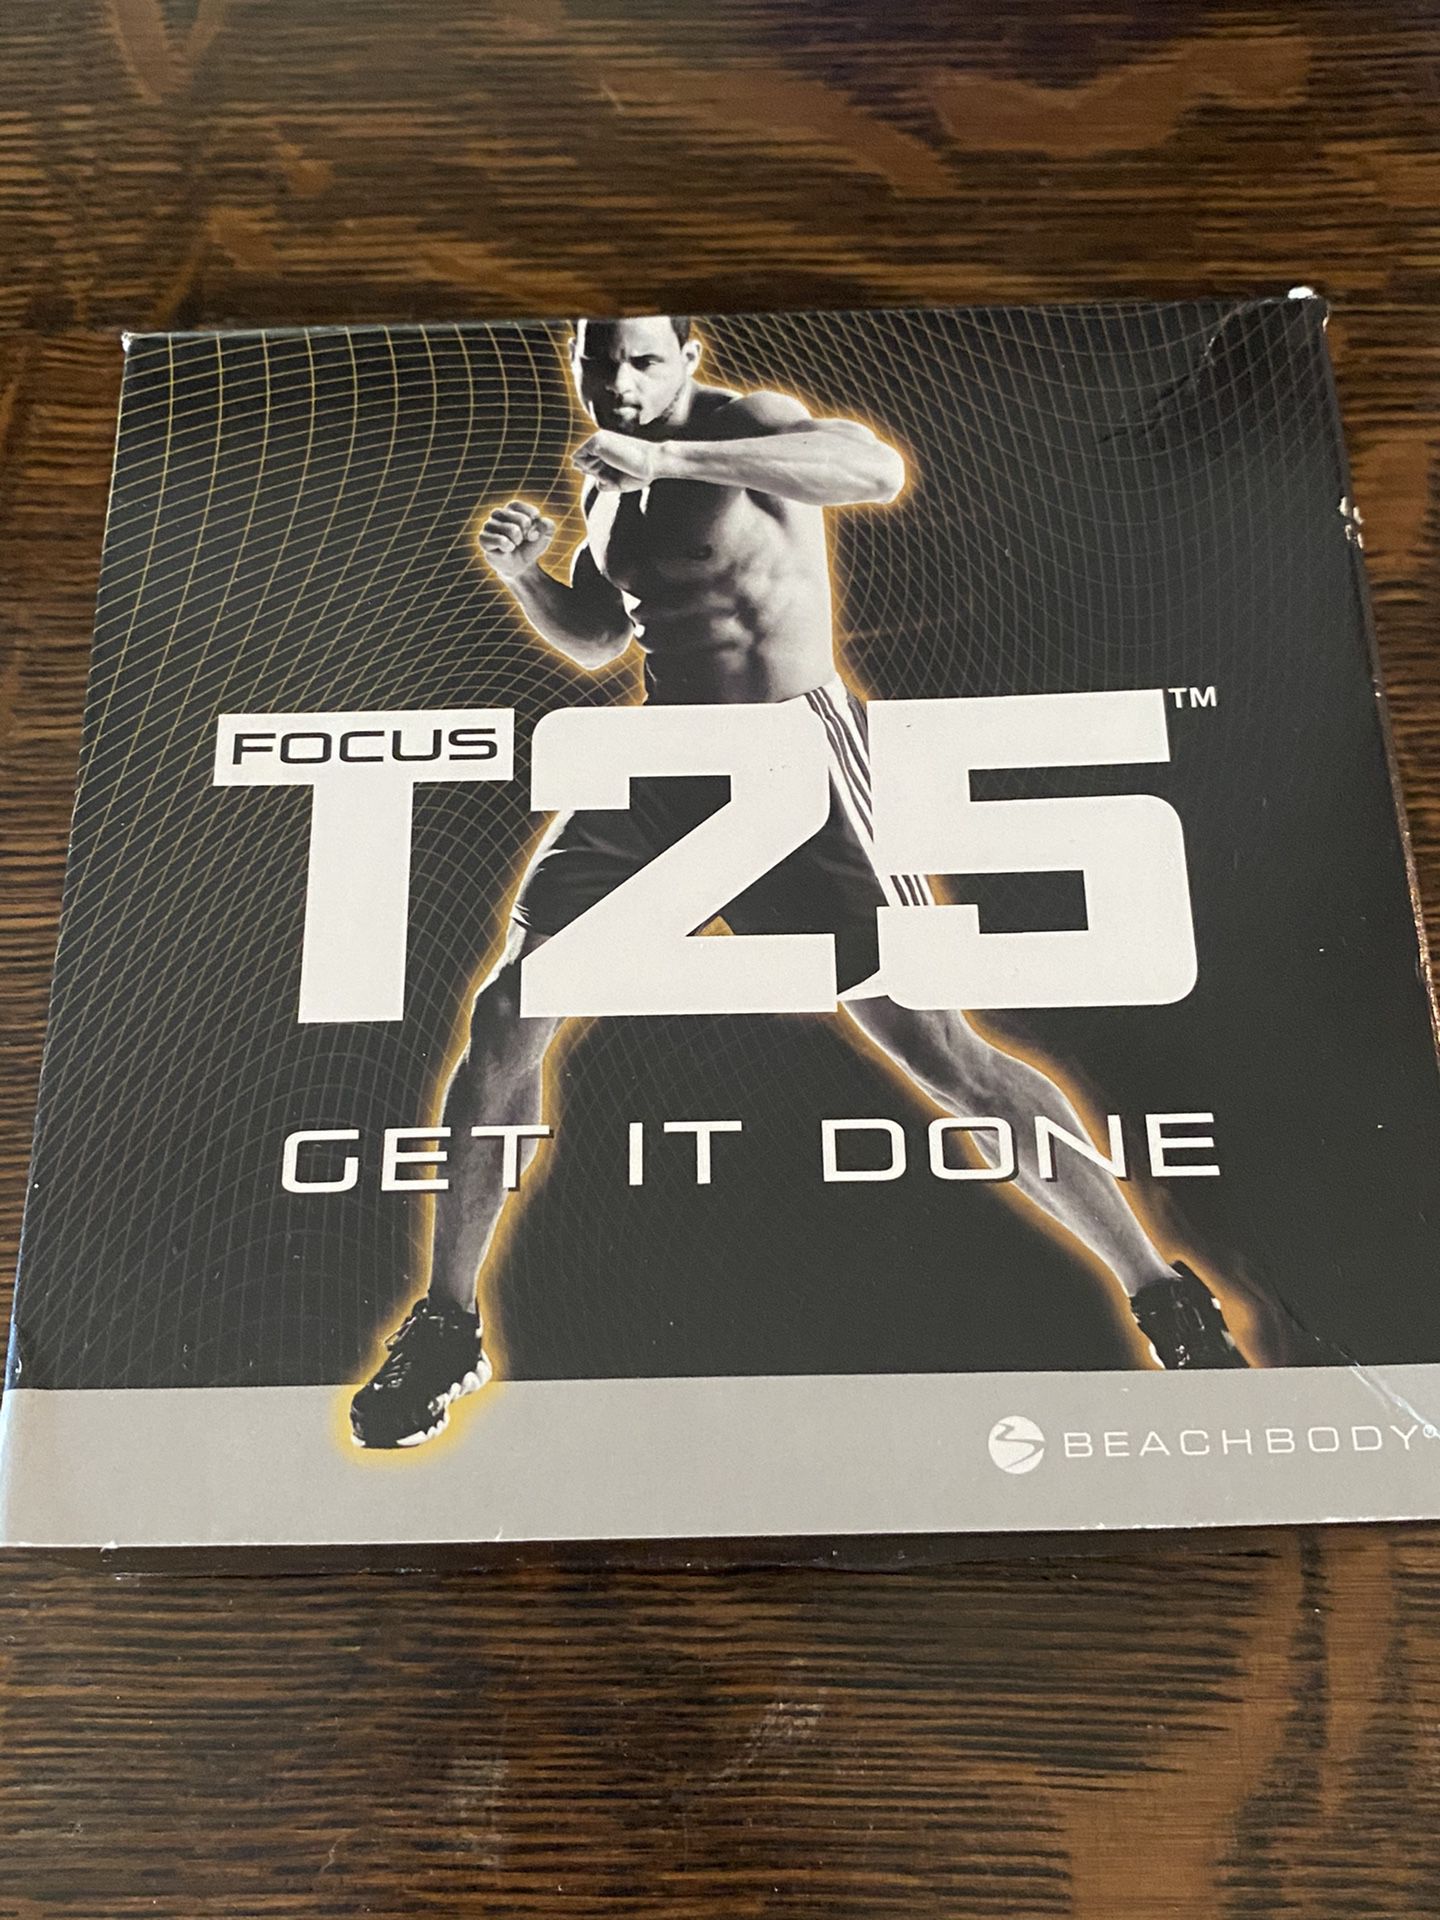 T25 exercise video set